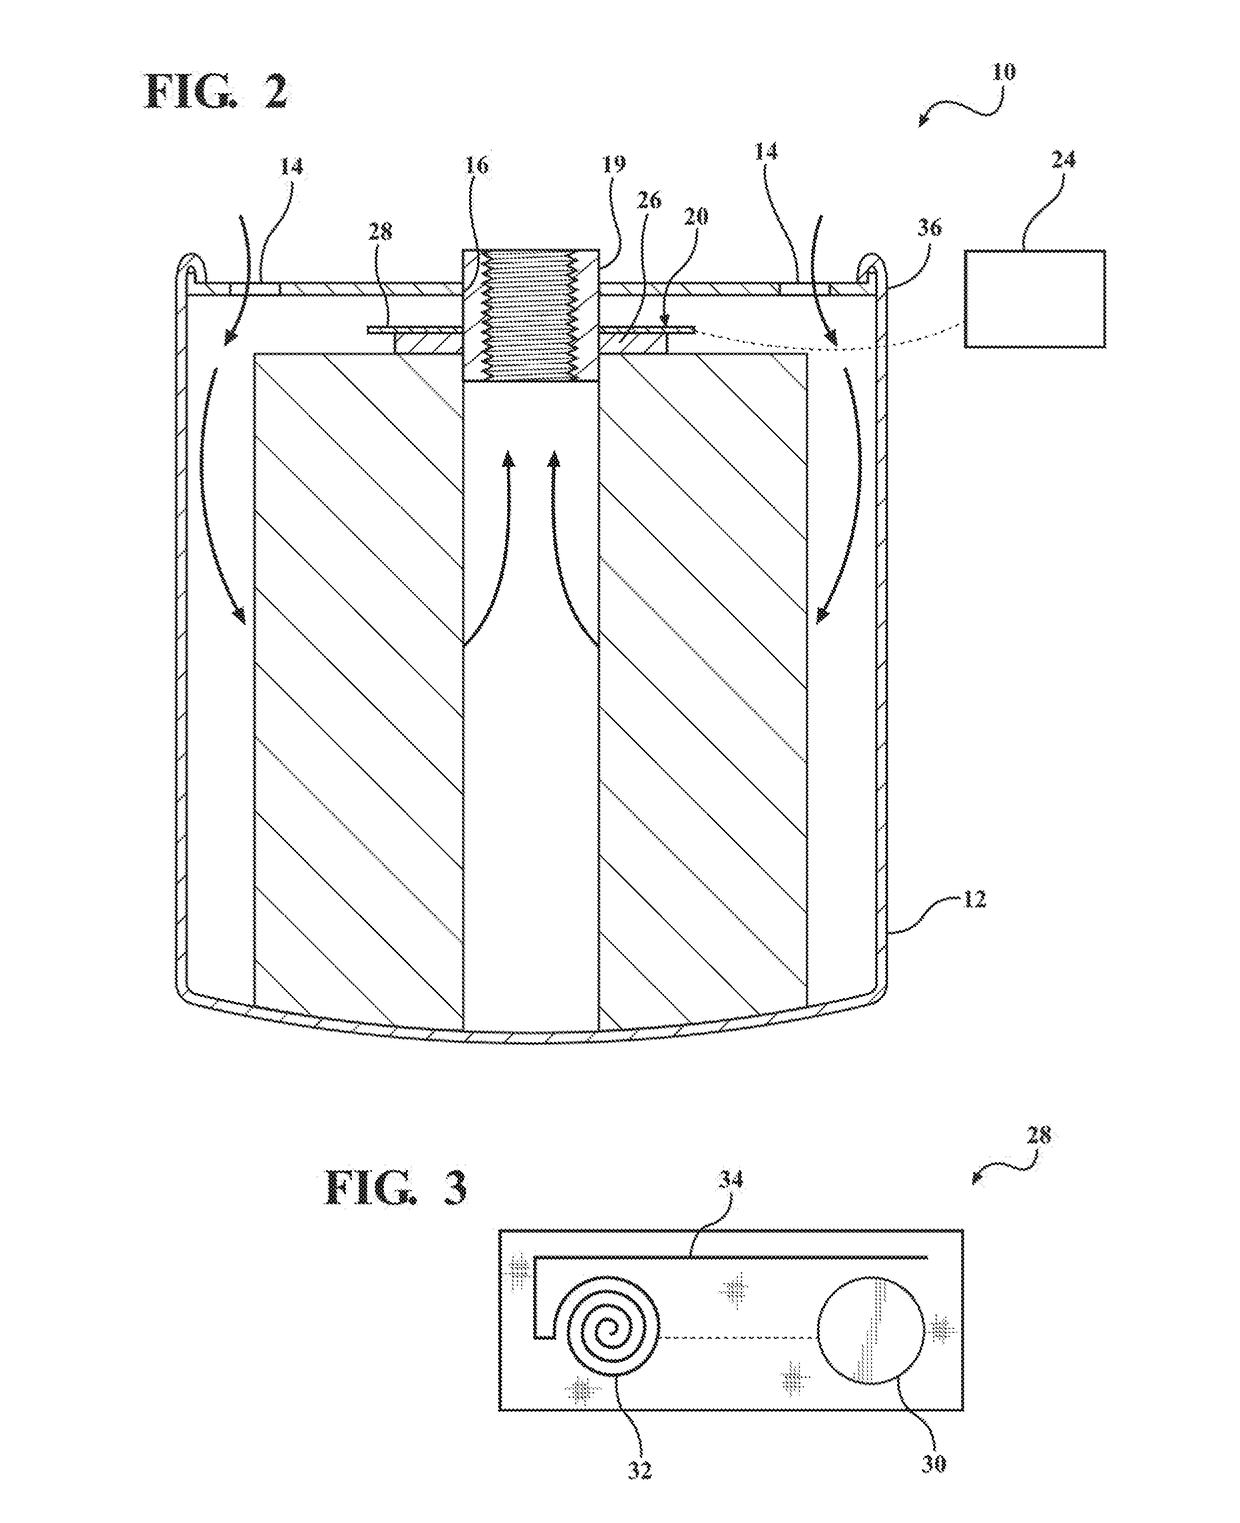 Disposable filter including an integrated sensor assembly